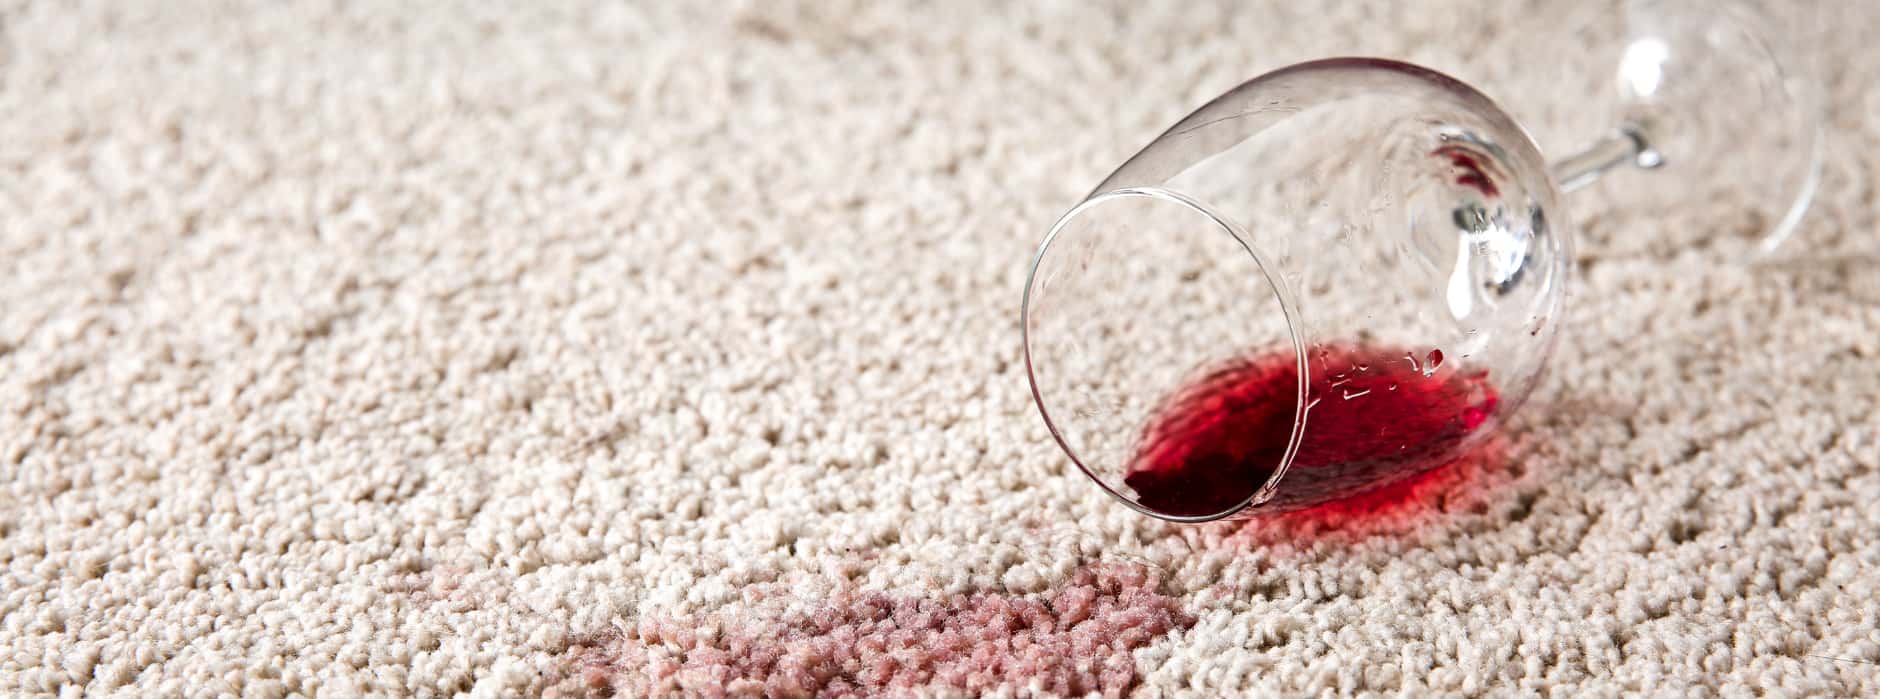 This is a photo of red wine which has been spilt on a cream carpet. The glass is on its side.